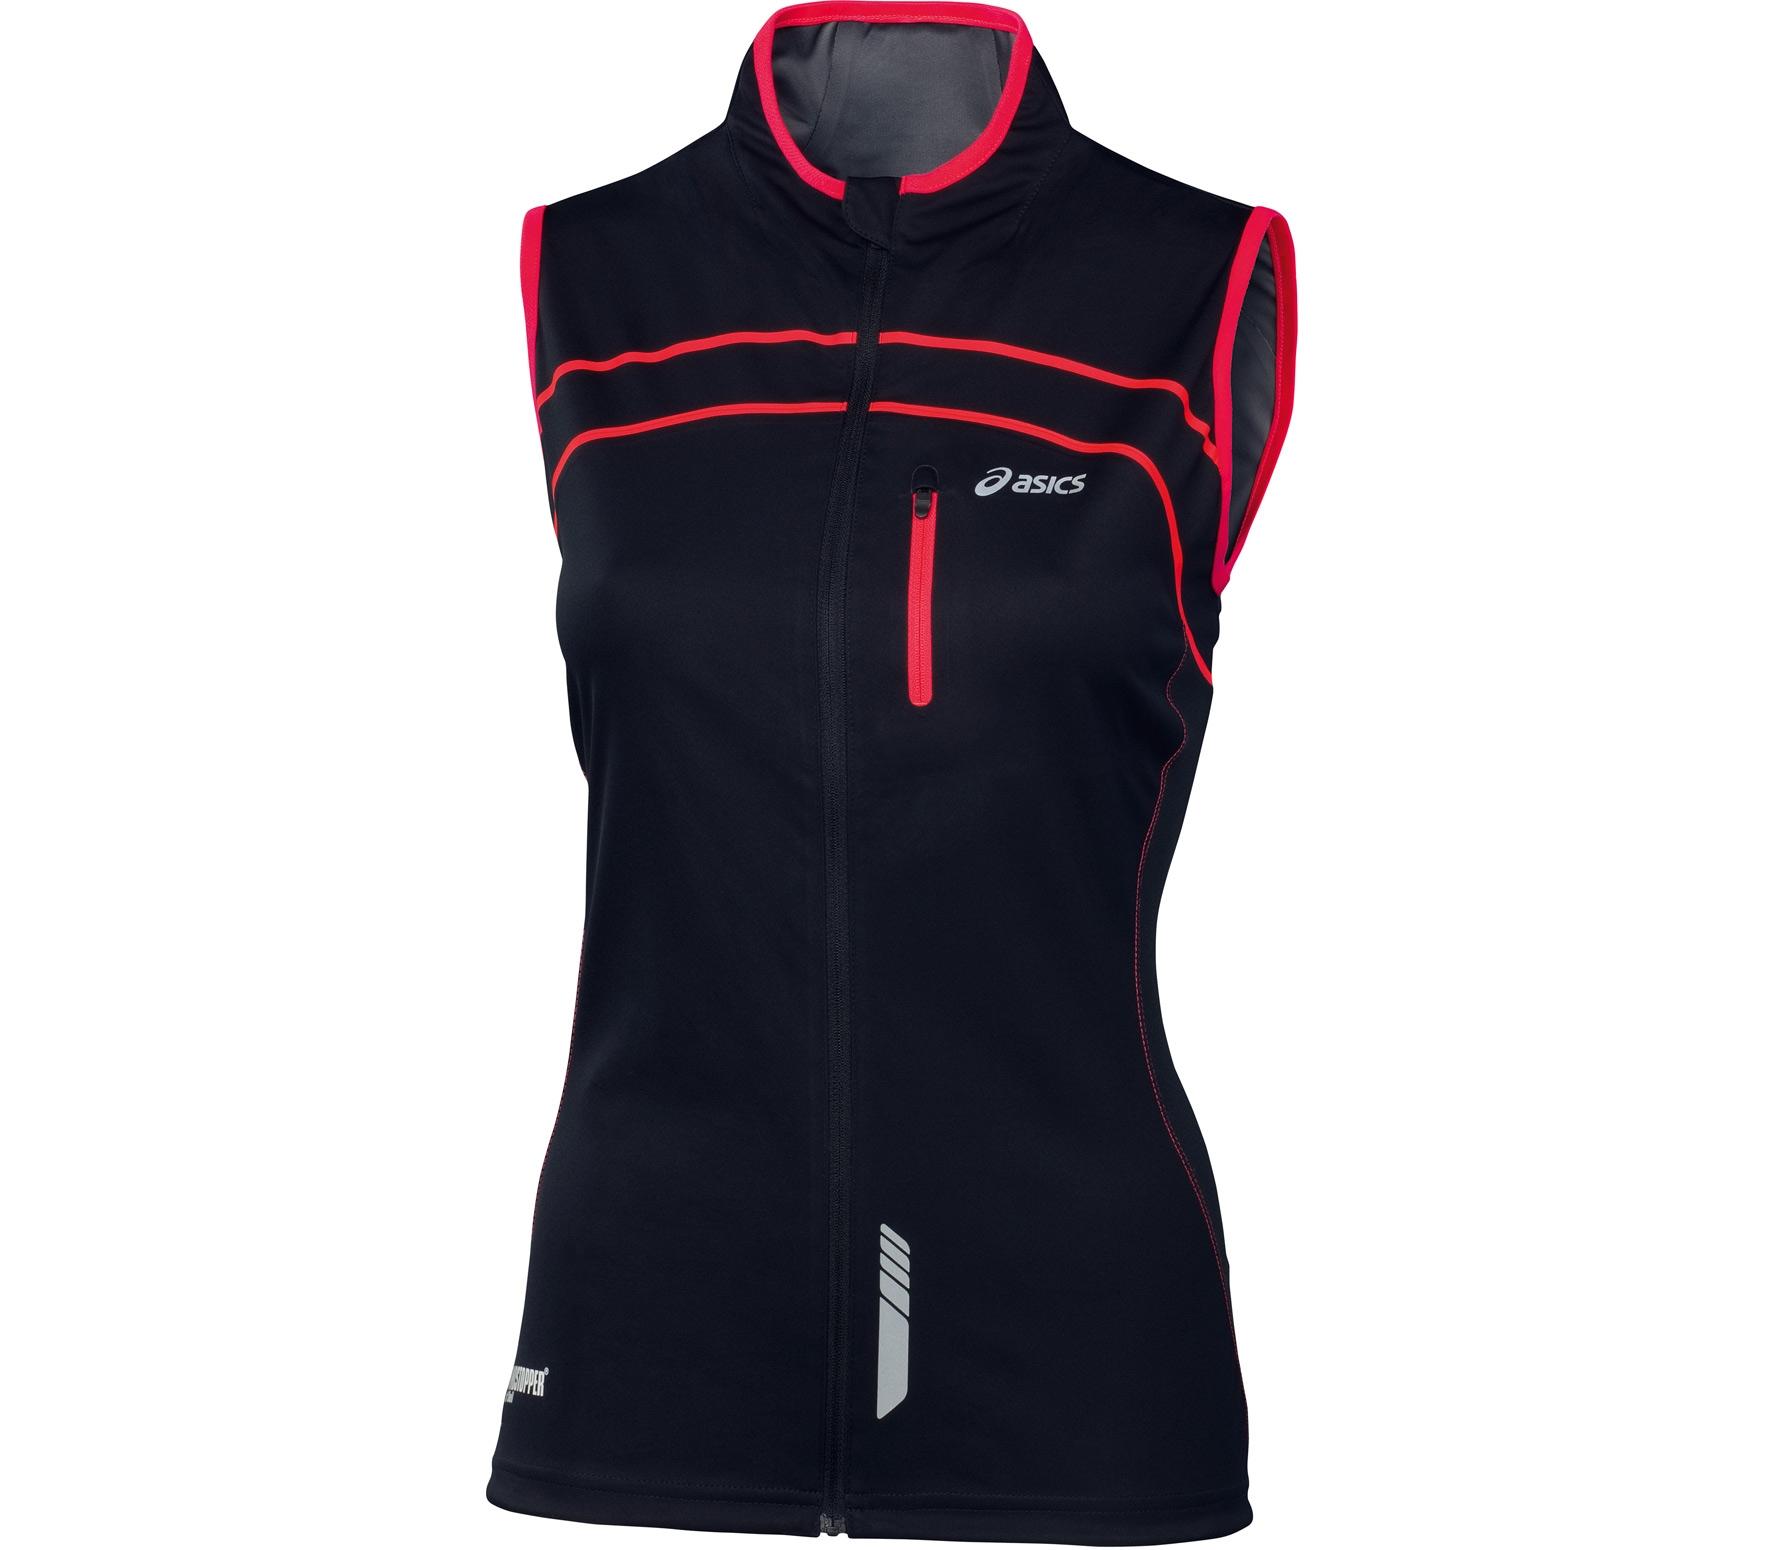 Foto Asics - Chaleco Running Mujer Gore Gillet - FS13 foto 909702